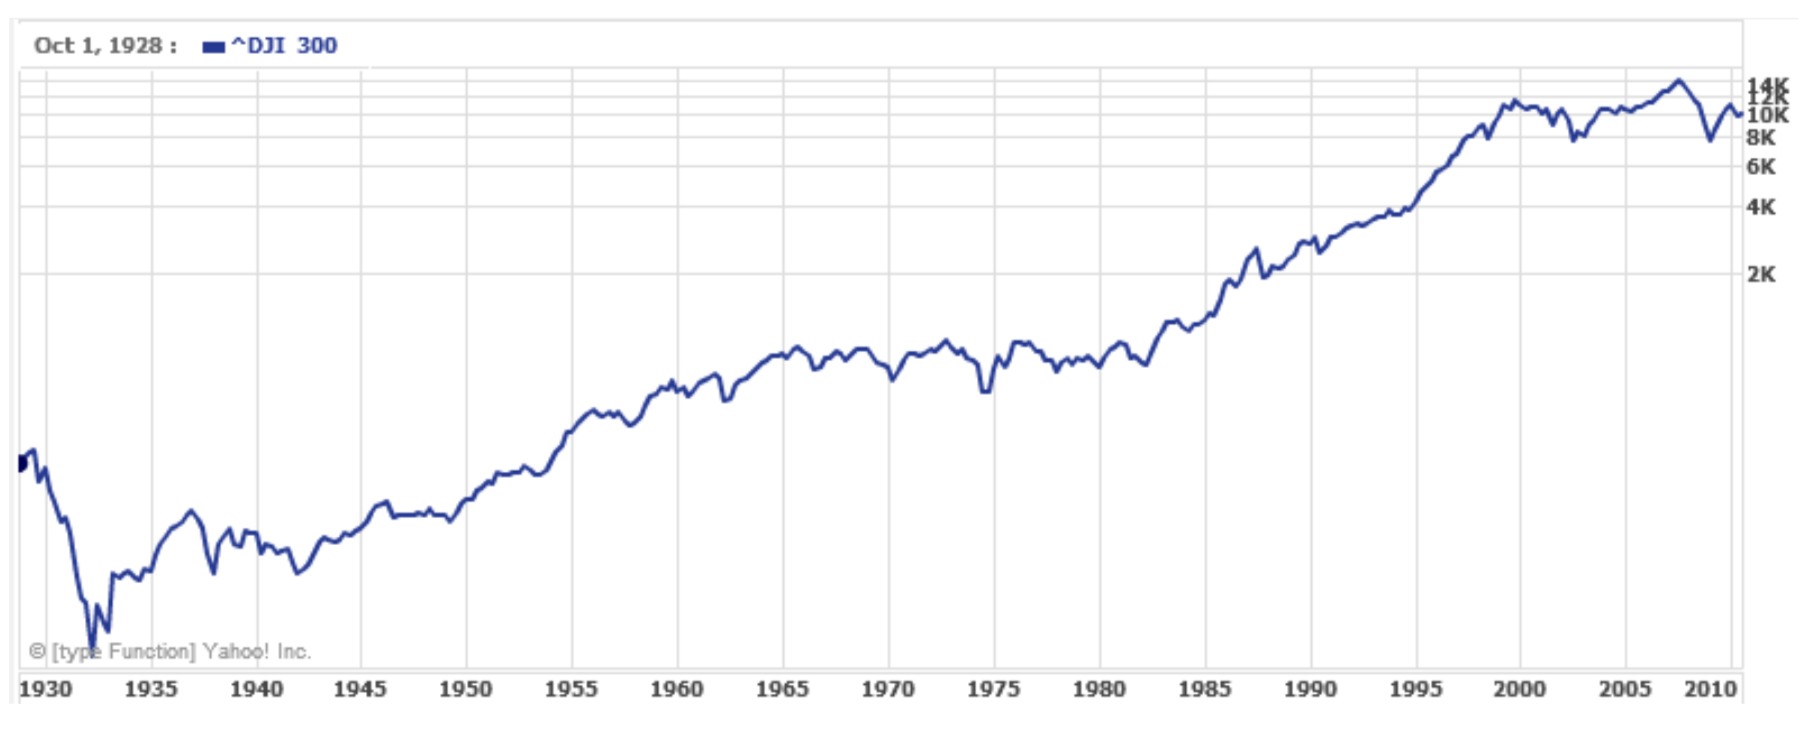 A chart showing the Dow Jones Industrial Average from 1928 to 2010. The vertical axis goes from 0 to 14 thousand, with tick marks logarithmically spaced  The graph appears roughly to be increasing linear, but with a large drop in 1930, and smaller looking drops in 2000 and 2008.